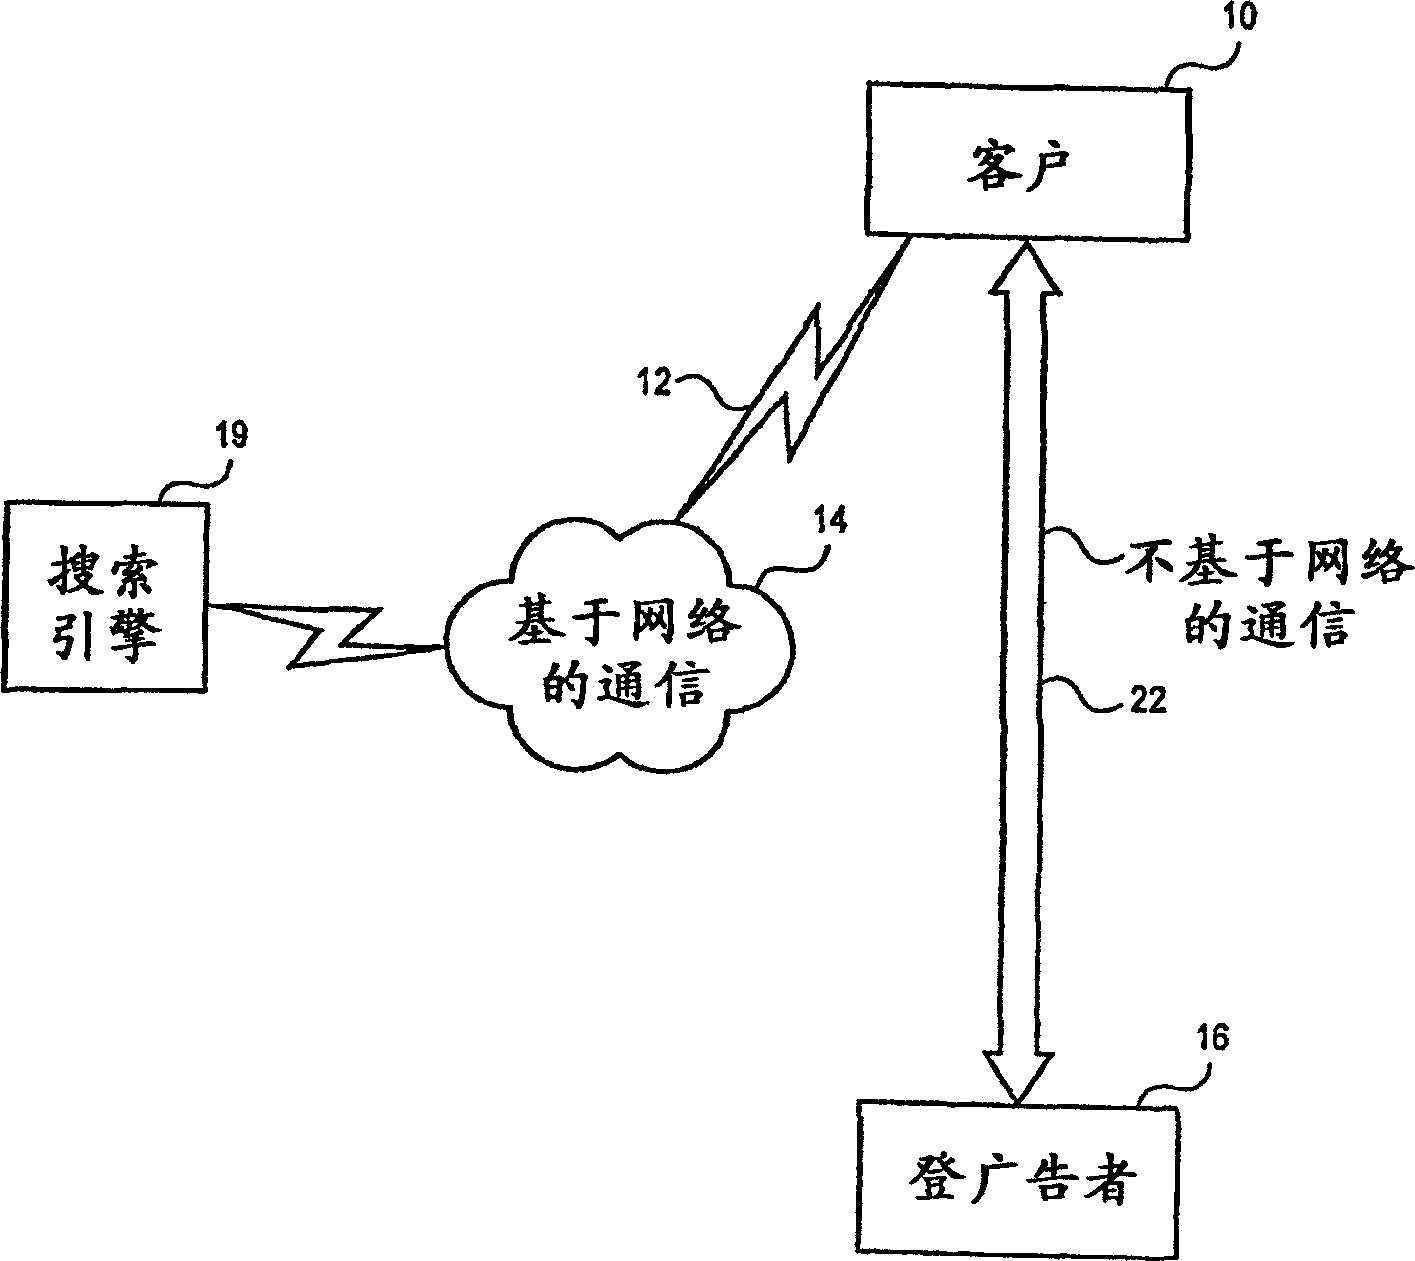 A method and apparatus to dynamically allocate and recycle telephone numbers in a call-tracking system